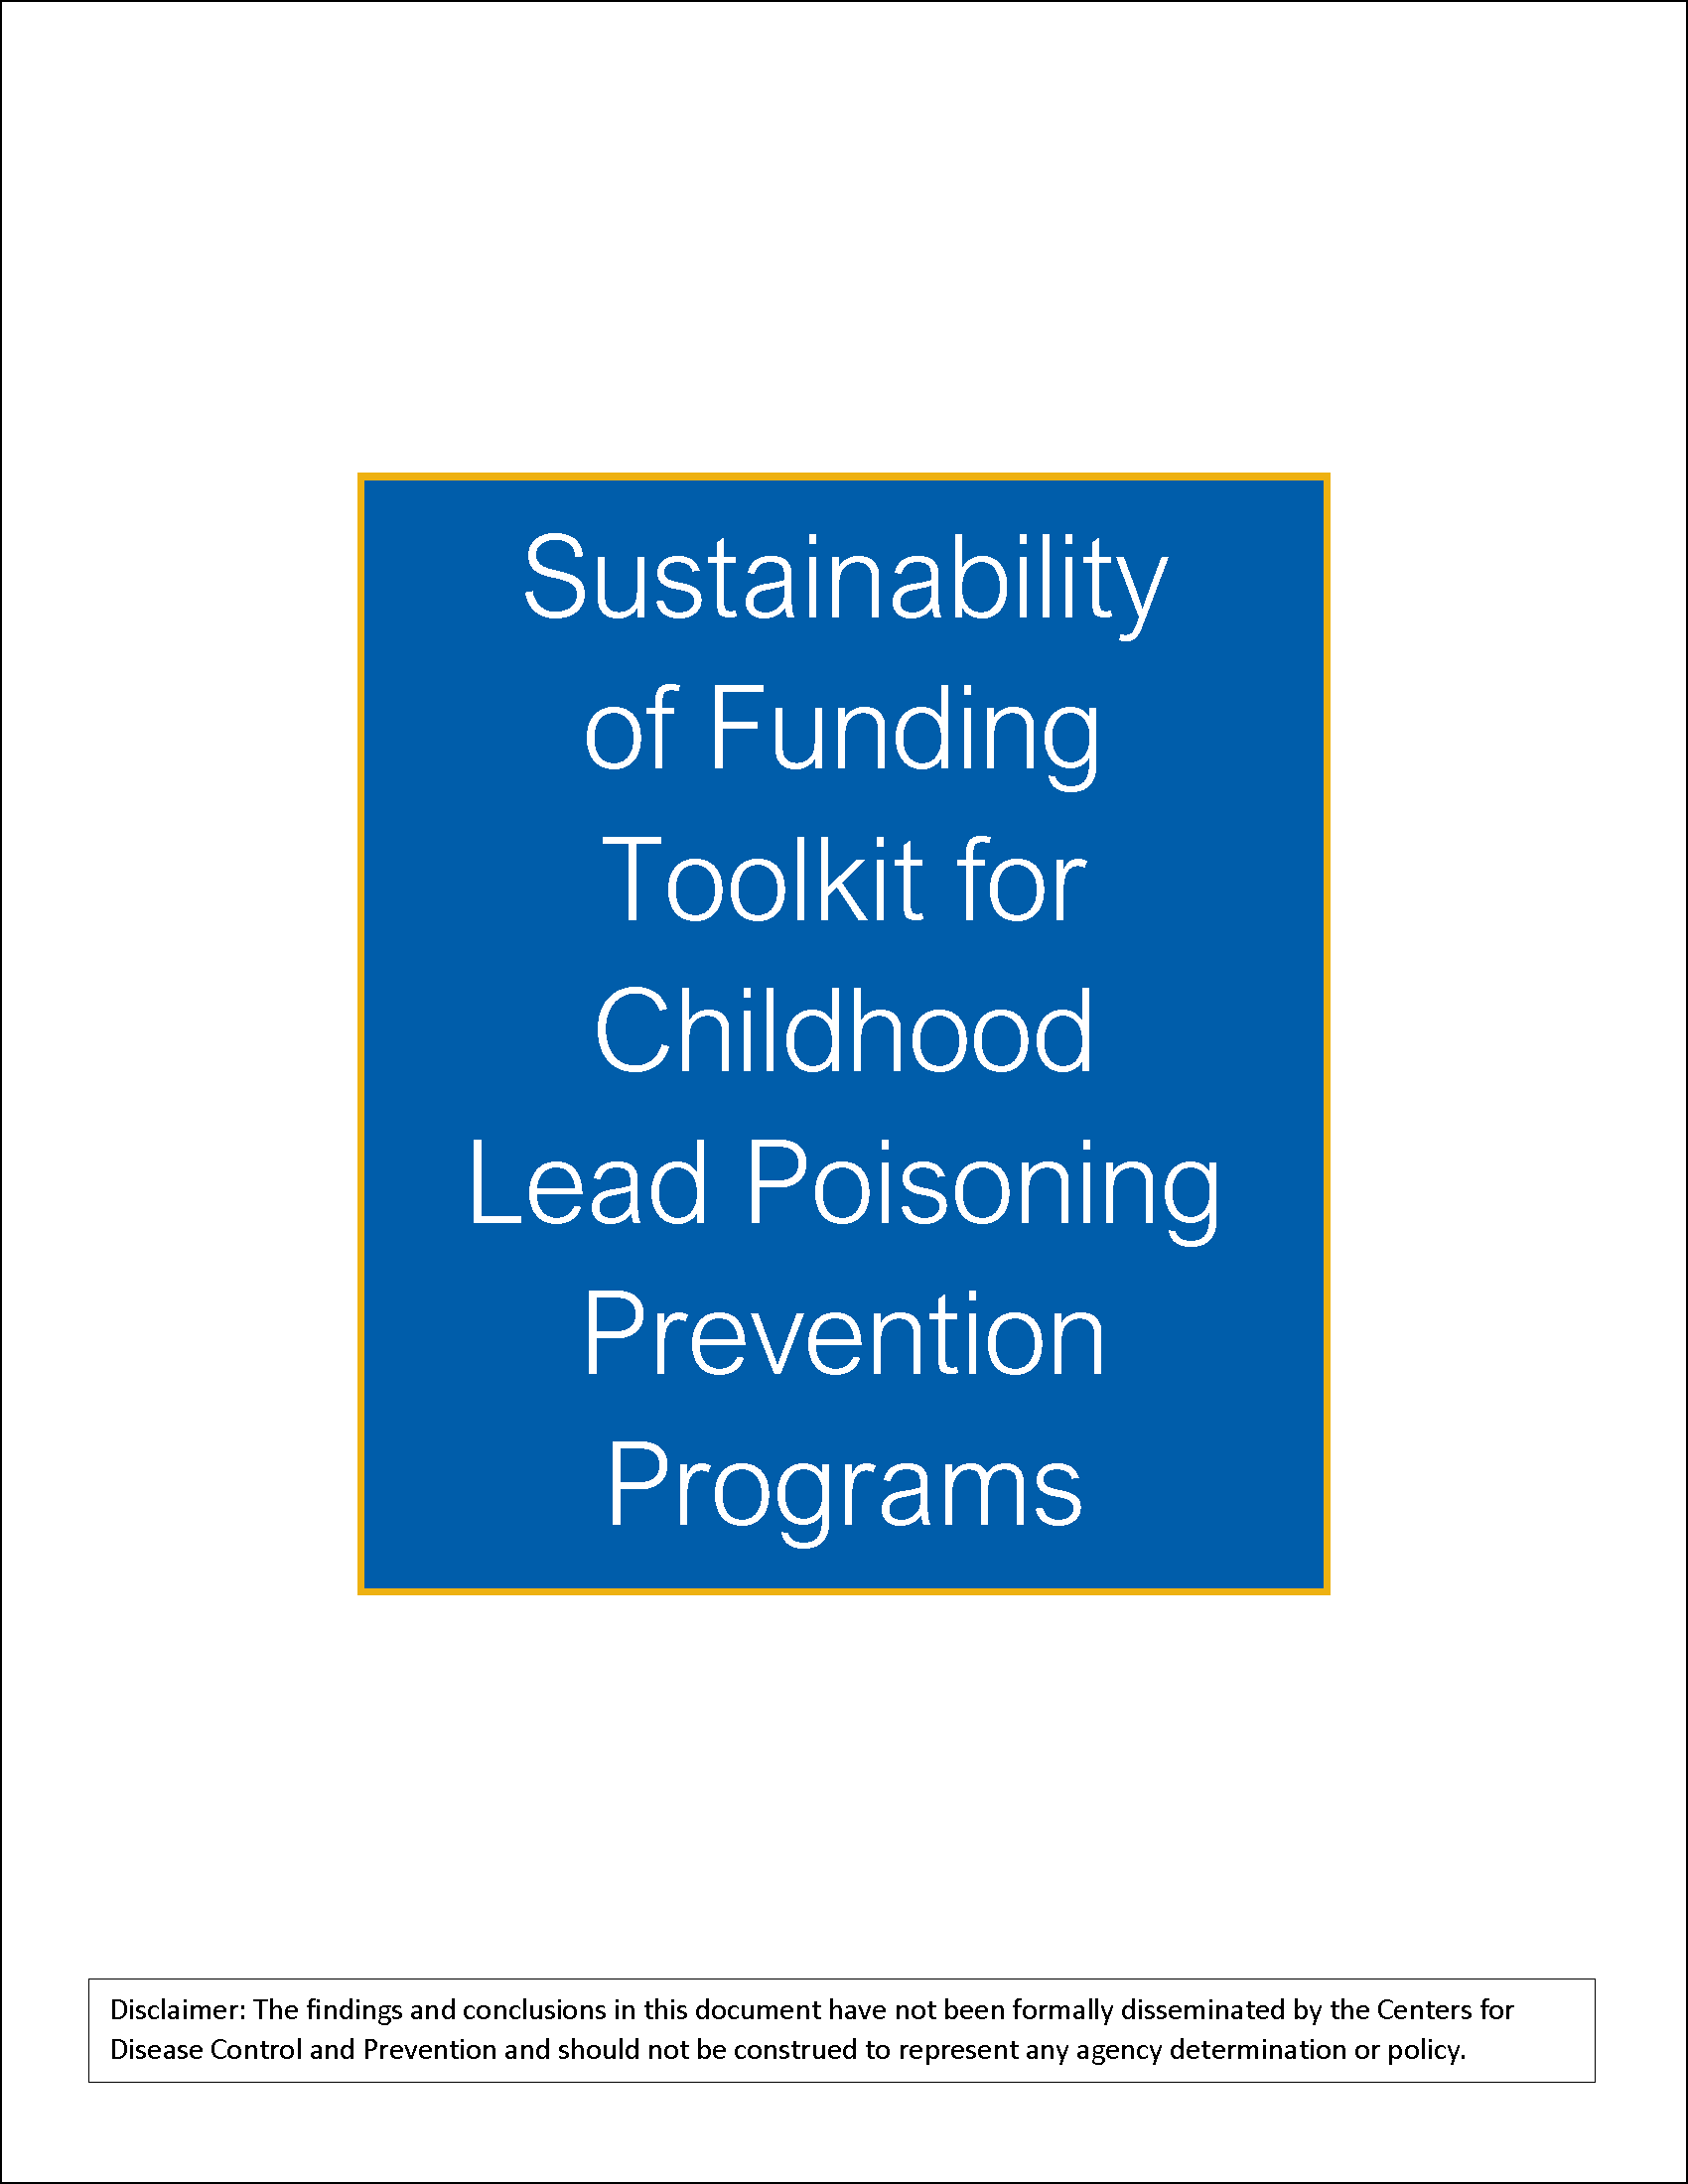 CDC - Sustainability of Funding Toolkit for Childhood Lead Poisoning Prevention Programs